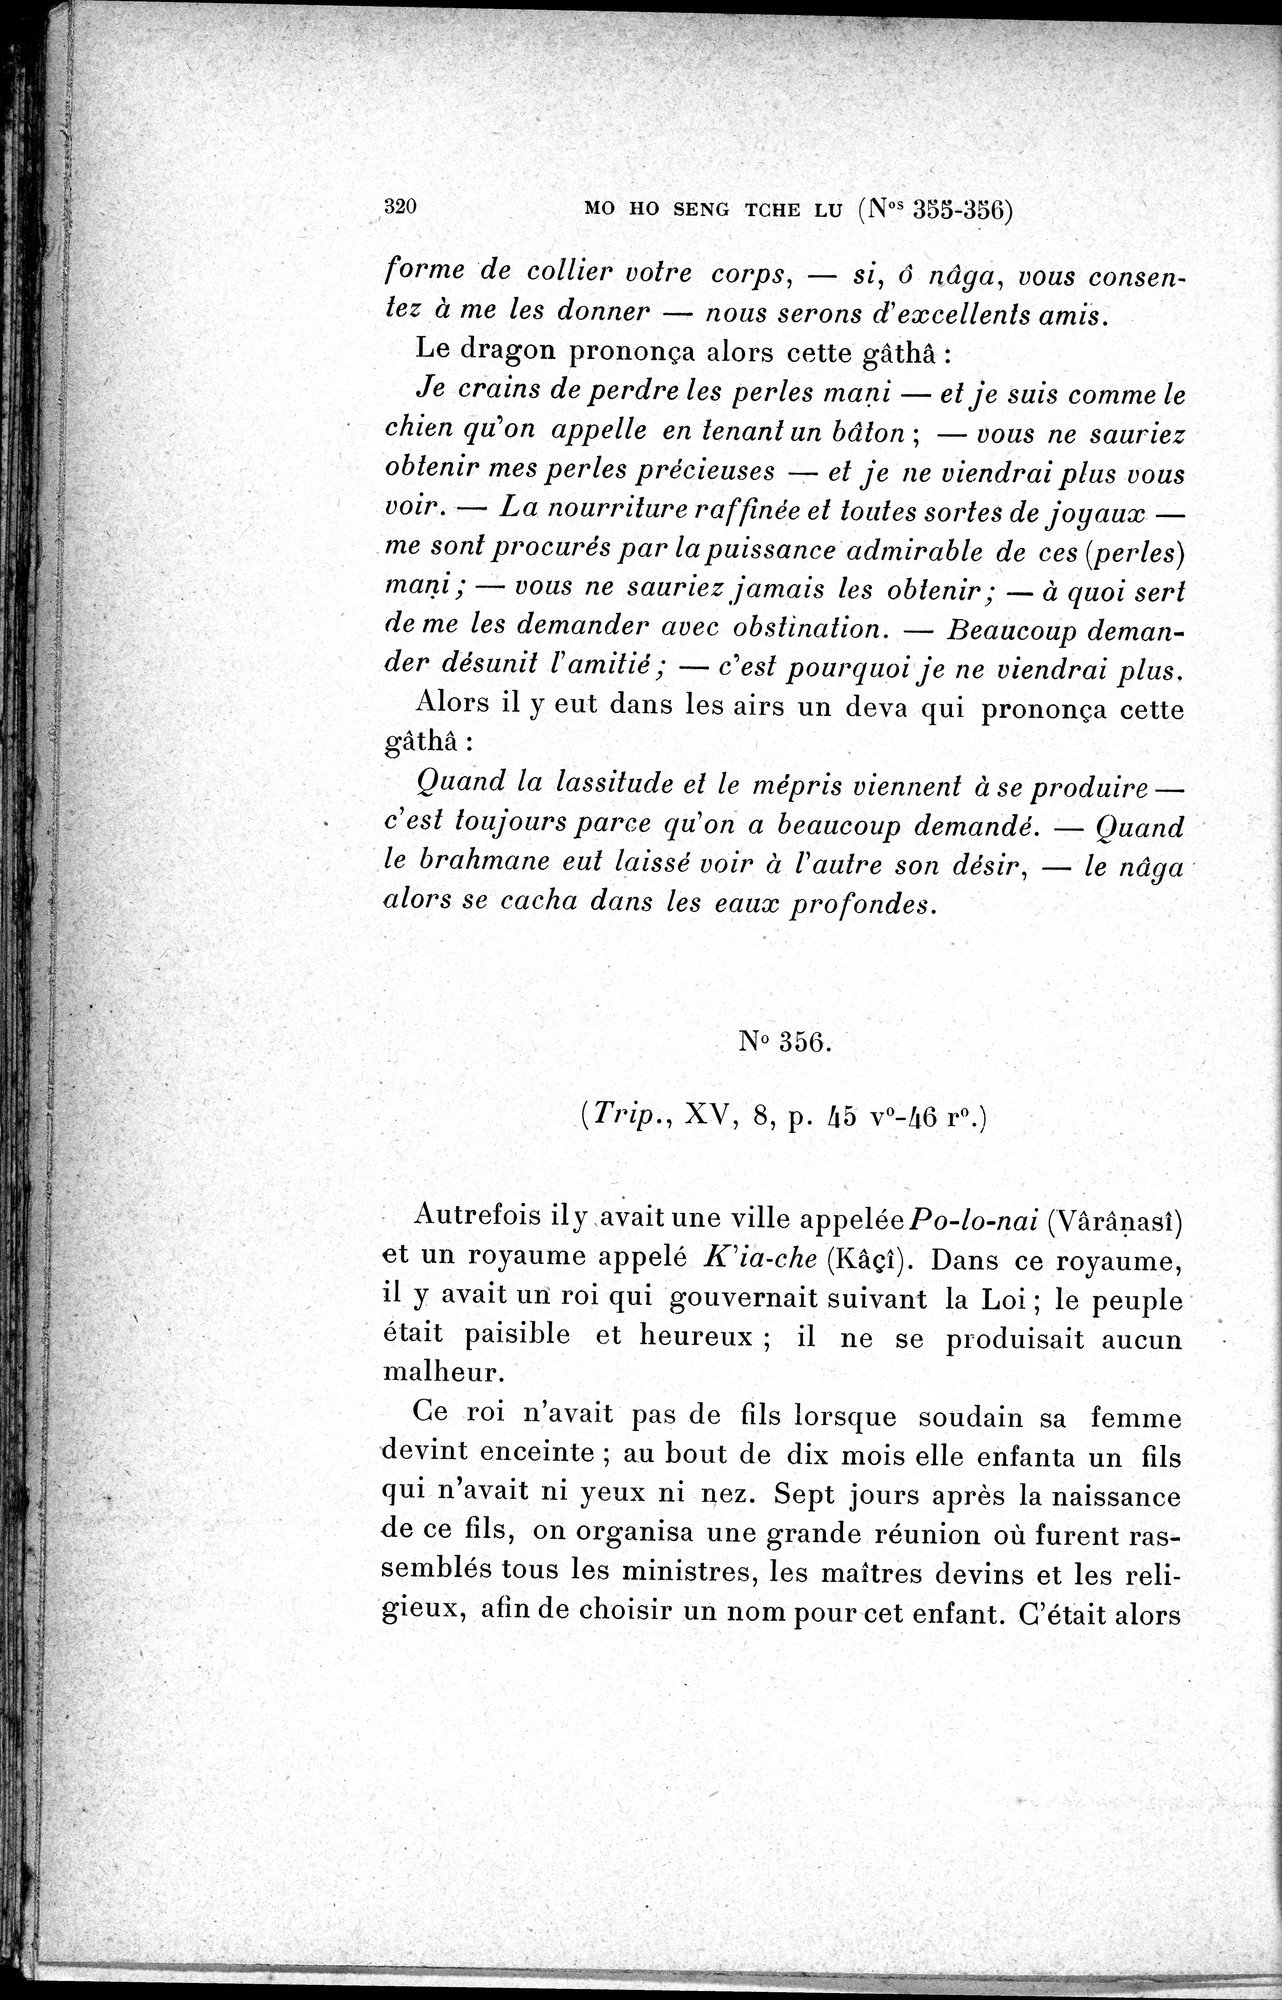 Cinq Cents Contes et Apologues : vol.2 / Page 334 (Grayscale High Resolution Image)